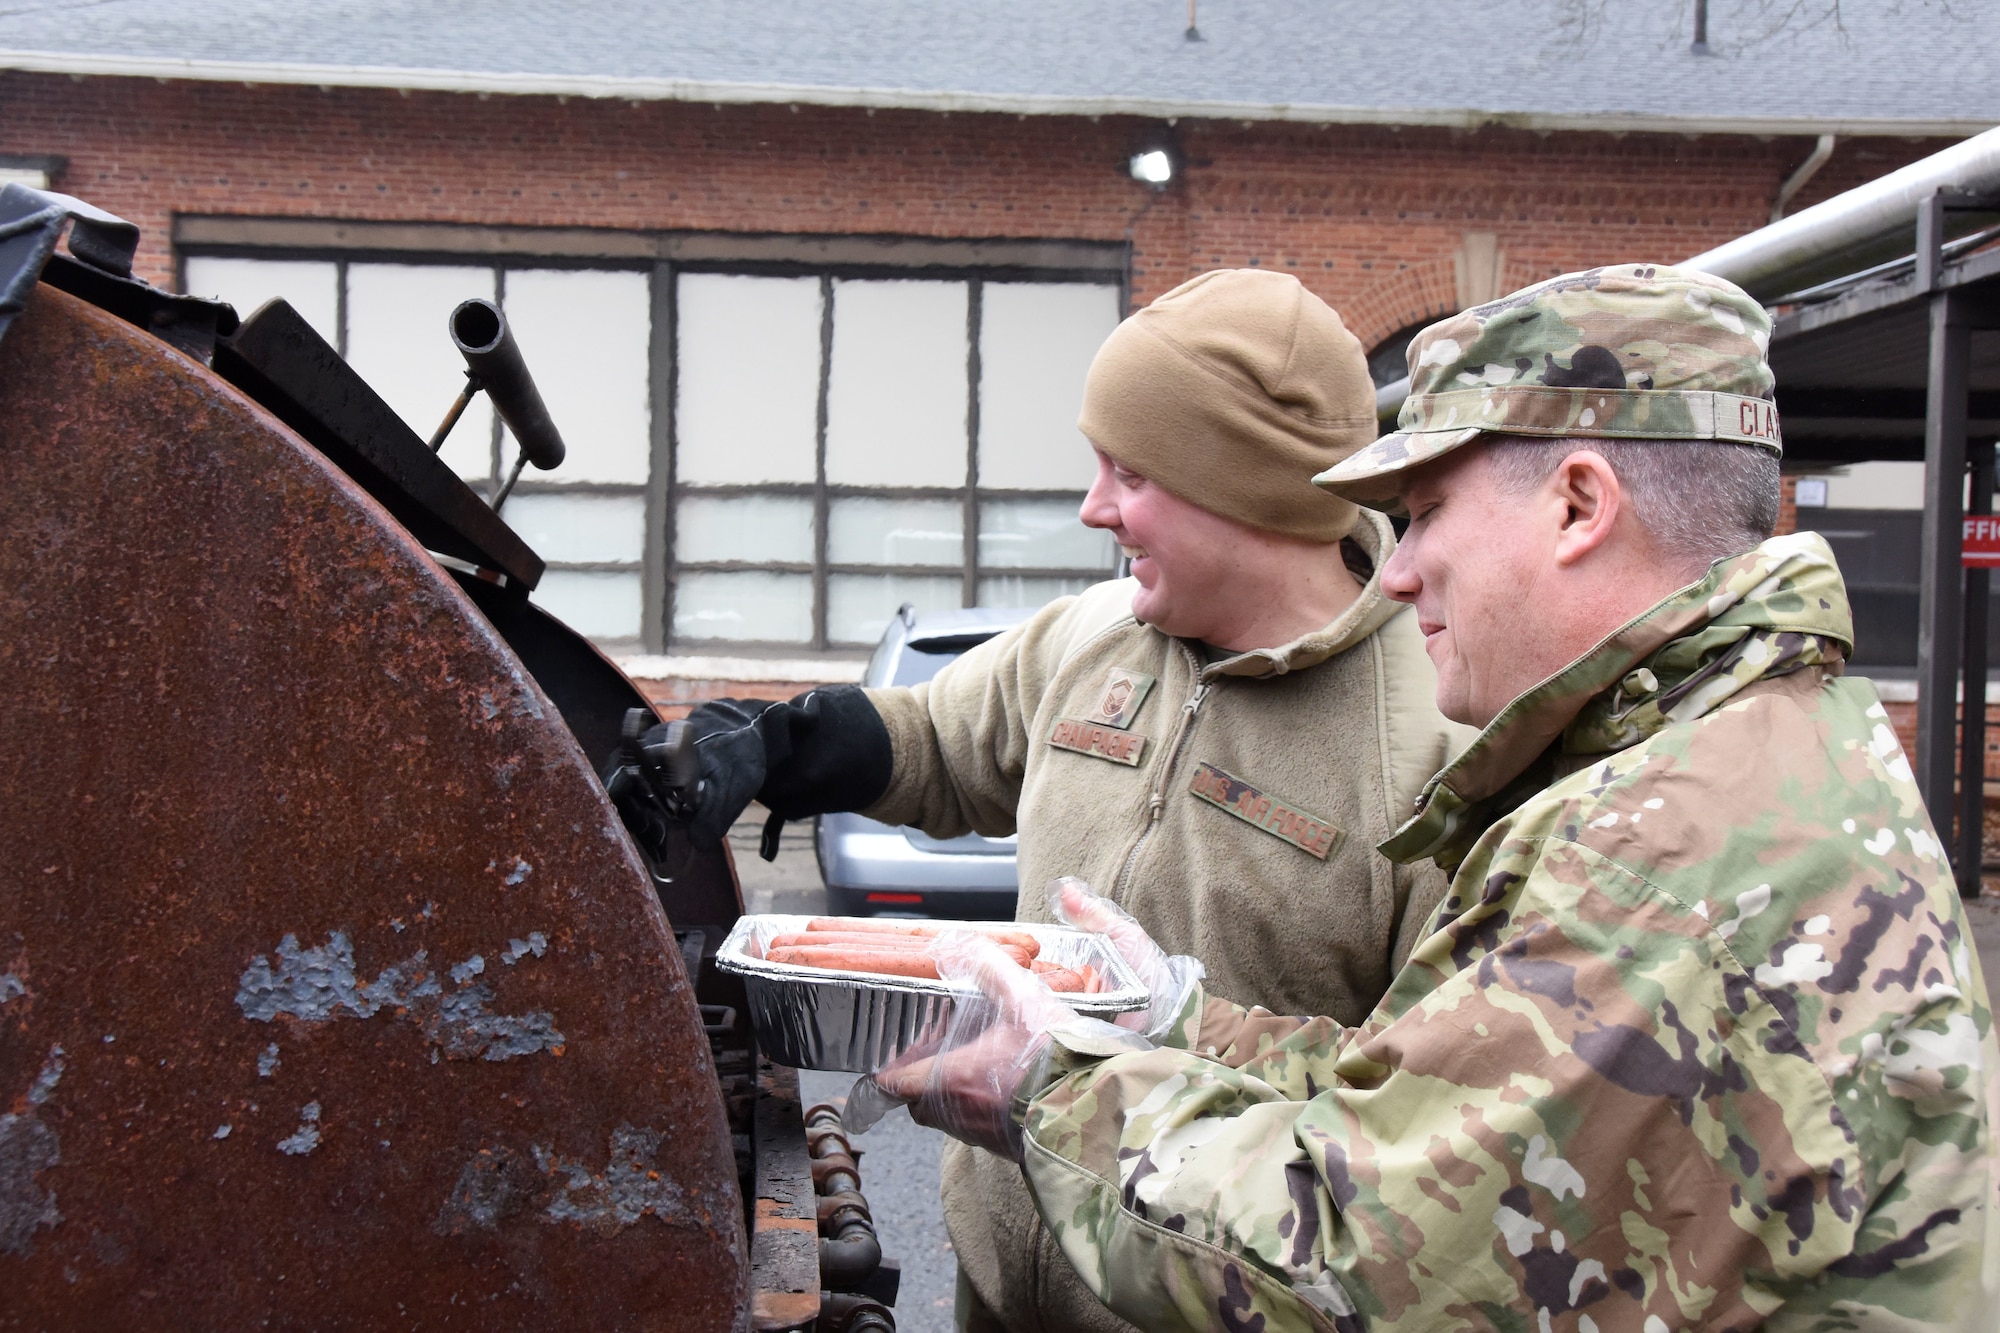 U.S. Air Force Senior Master Sgt. Carl Champagne (left), 263rd Flight Operations superintendent and Lt. Col. Bradley Claxton (right), 263rd Combat Communications commander, enjoy grilling nearly 400 hot dogs during Operation Santa held at Badin Elementary School, Badin, N.C., Dec. 14th, 2019.  Operation Santa is an annual event run by the Chapter 7 organization of the North Carolina Air National Guard (NCANG) which chooses select schools to provide assistance to families during the holiday season. This year, the NCANG provided presents, lunch, music, bouncy castles and a Santa. The NCANG also partnered with the local Target for food donations.